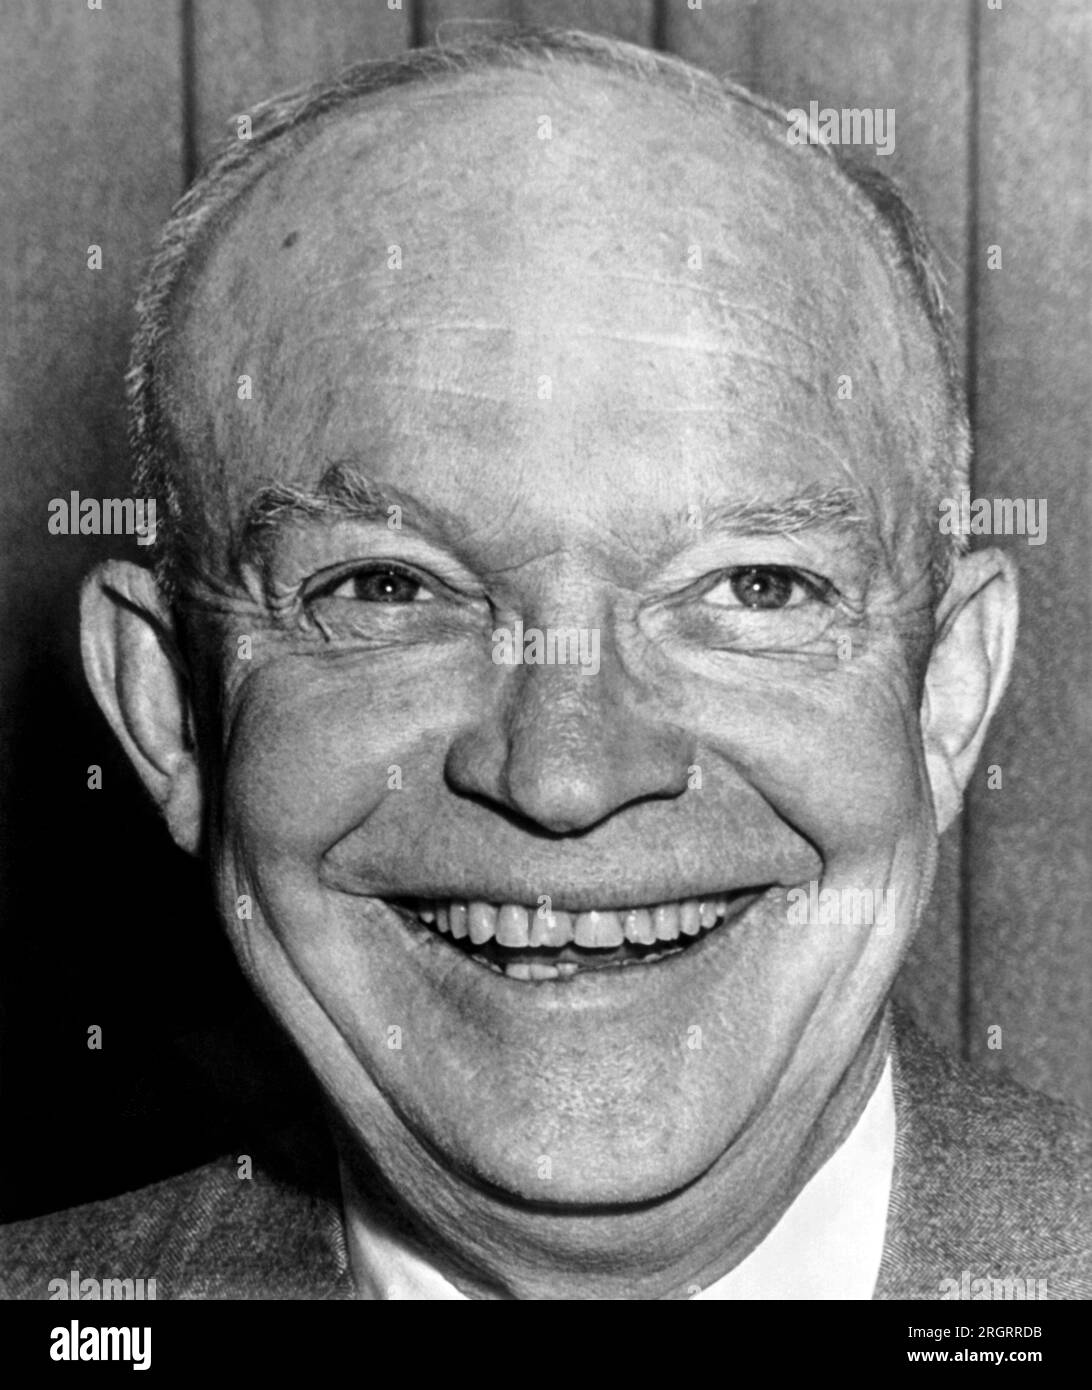 Washington, D.C.:  February 9, 1955 A portrait of President Dwight D. Eisenhower with his famous Ike smile. Stock Photo